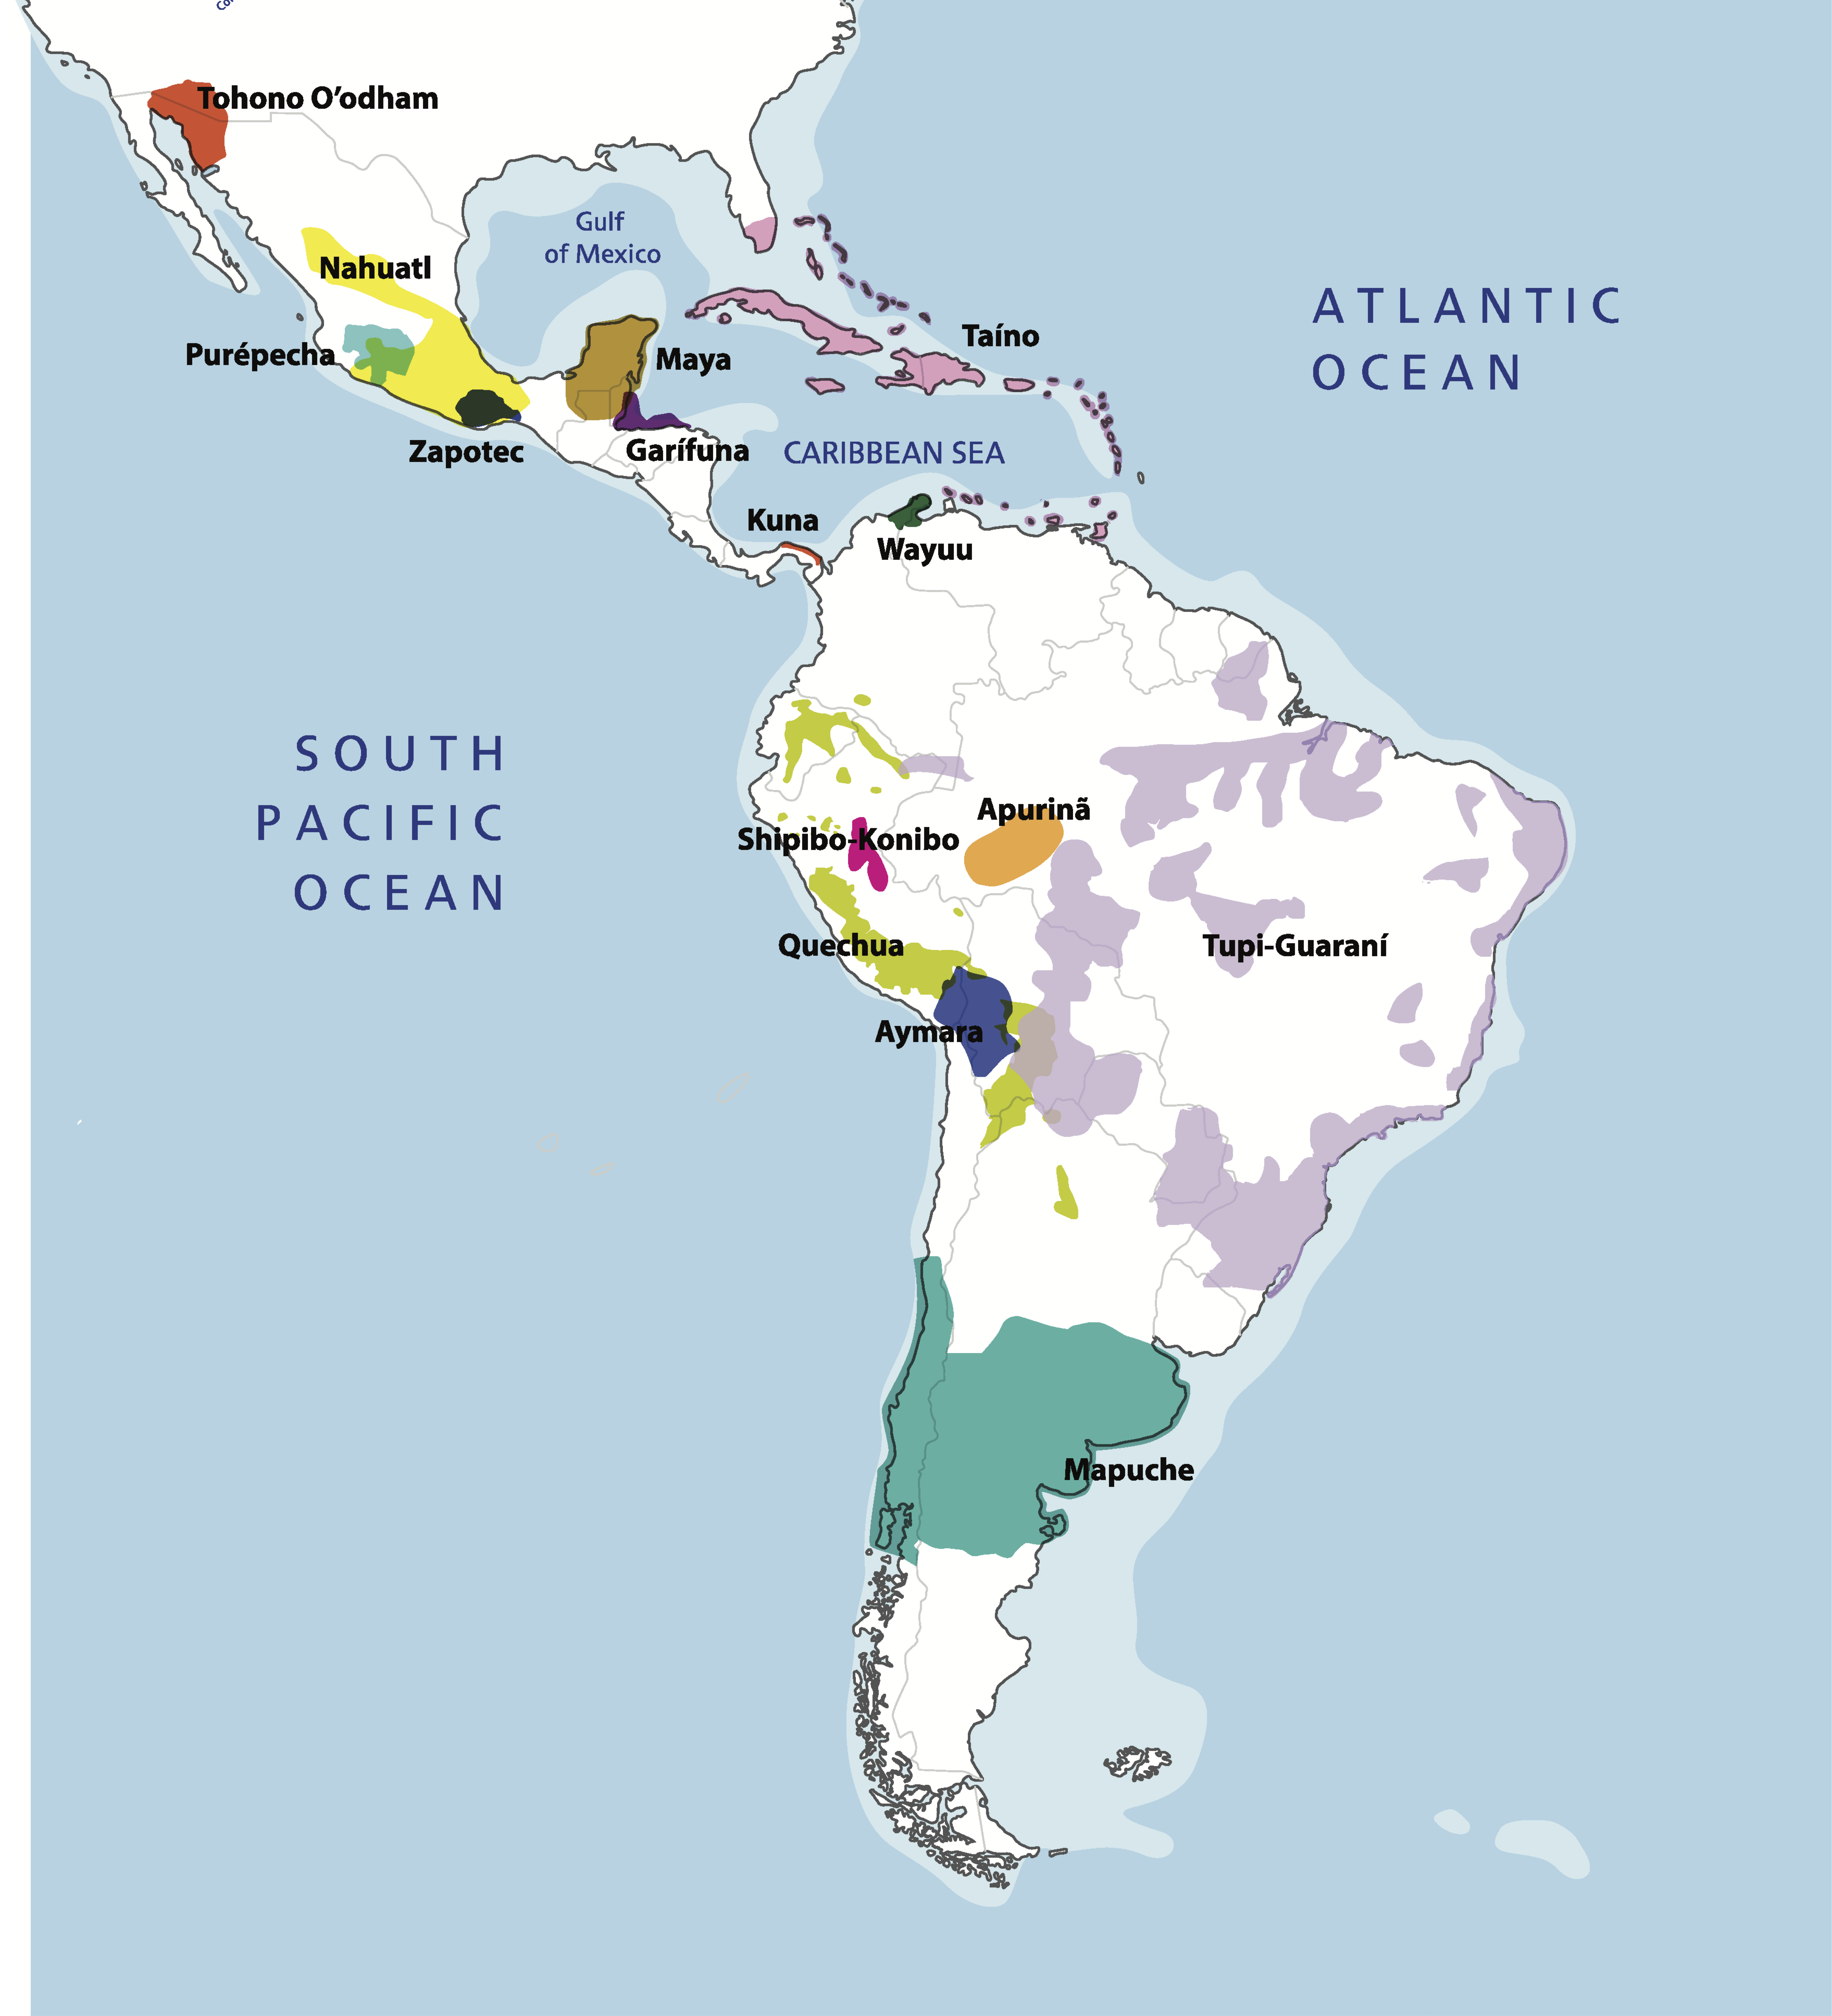 geographic distribution of major Indigenous languages in Middle and South America